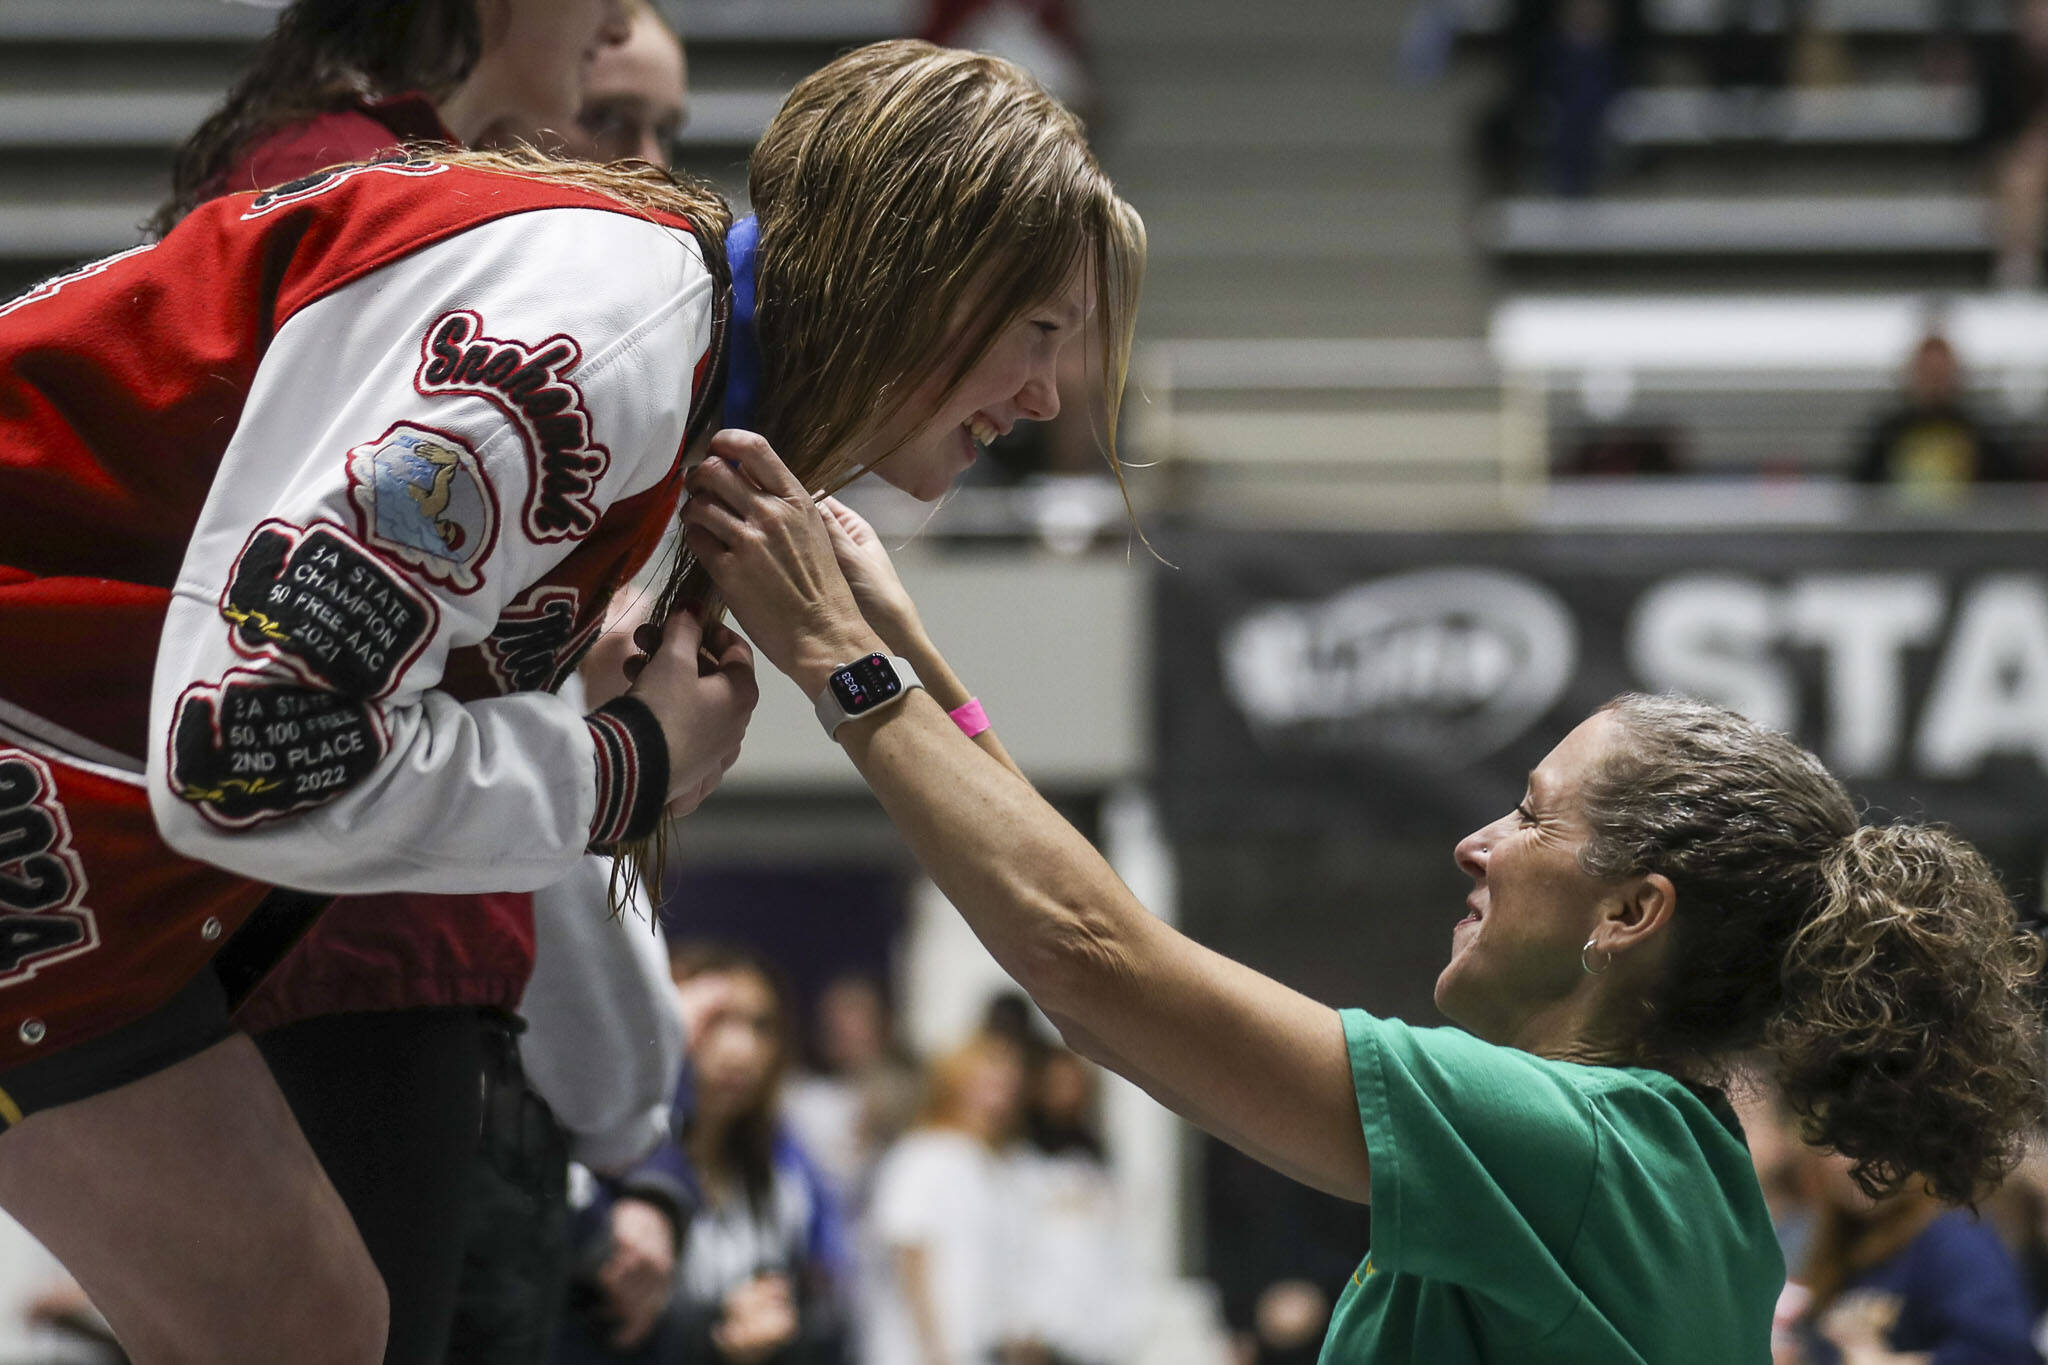 Snohomish’s Mary Clarke recieves a medal for winning heat two of the 100 yard freestyle during the 3A girls state swim and dive championships at King County Aquatic Center in Federal Way, Washington on Saturday, Nov. 11, 2023. (Annie Barker / The Herald)